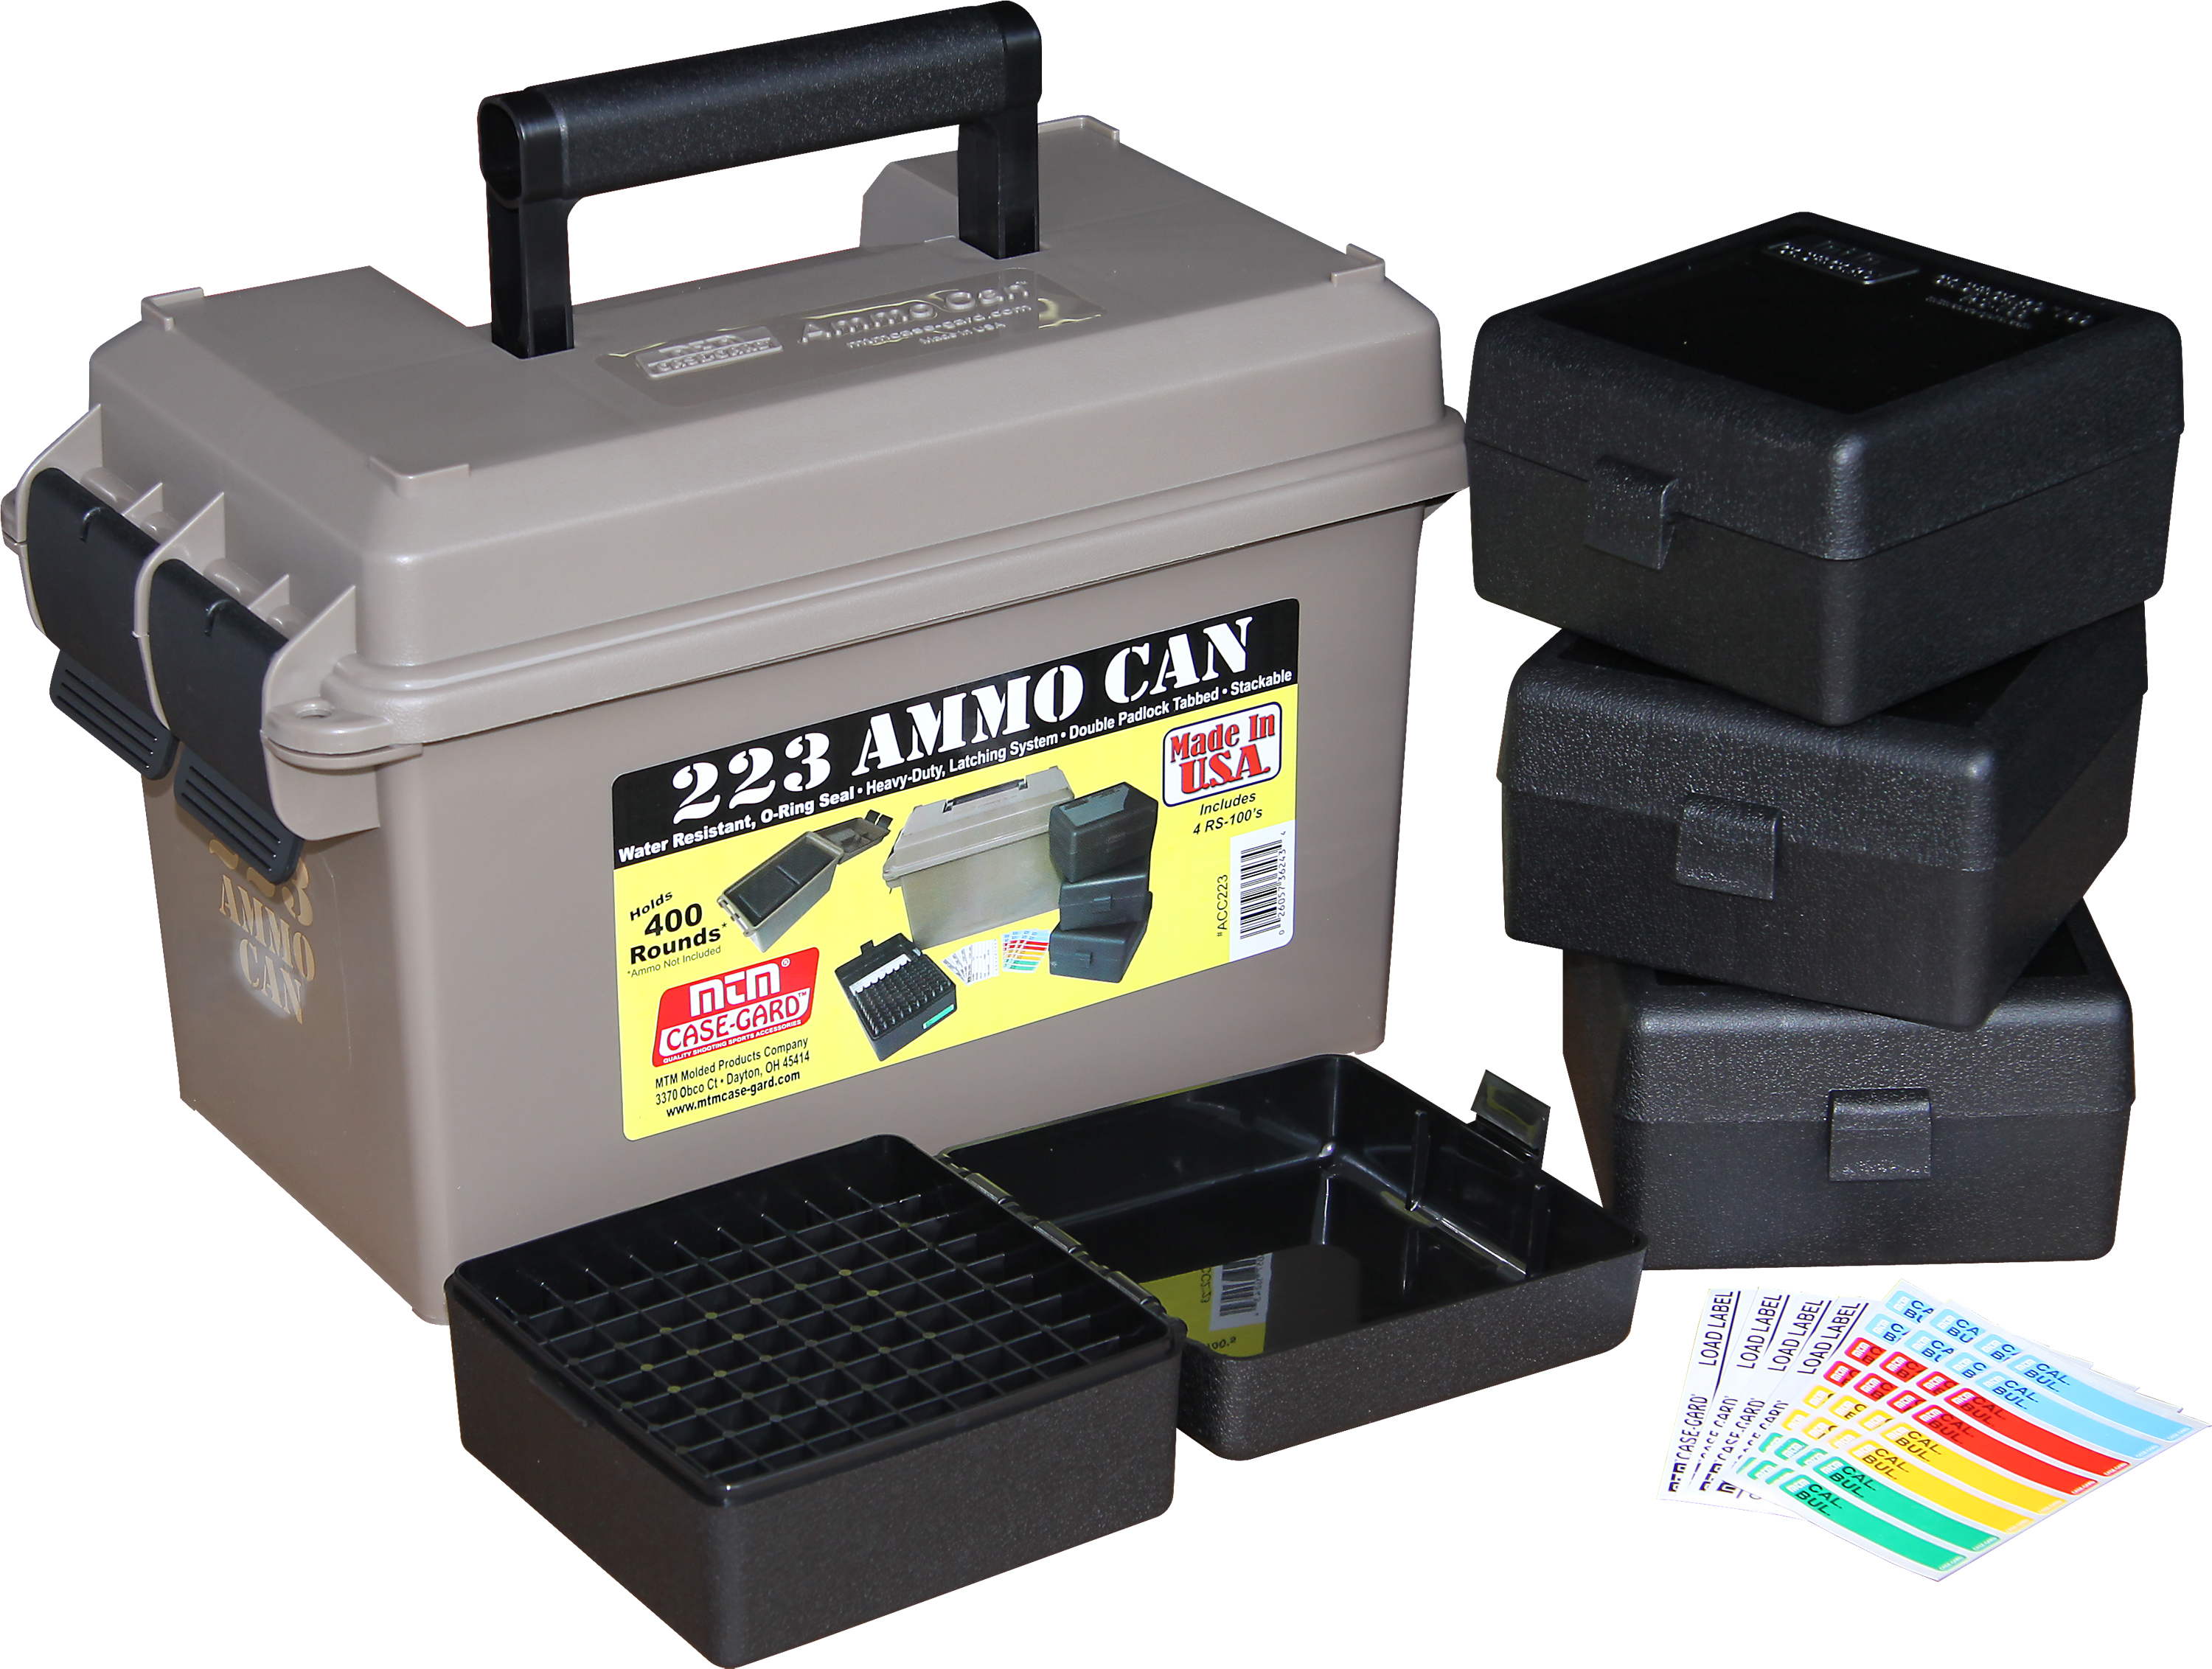 MTM 45 Cal Ammo Can  5 Star Rating Free Shipping over $49!